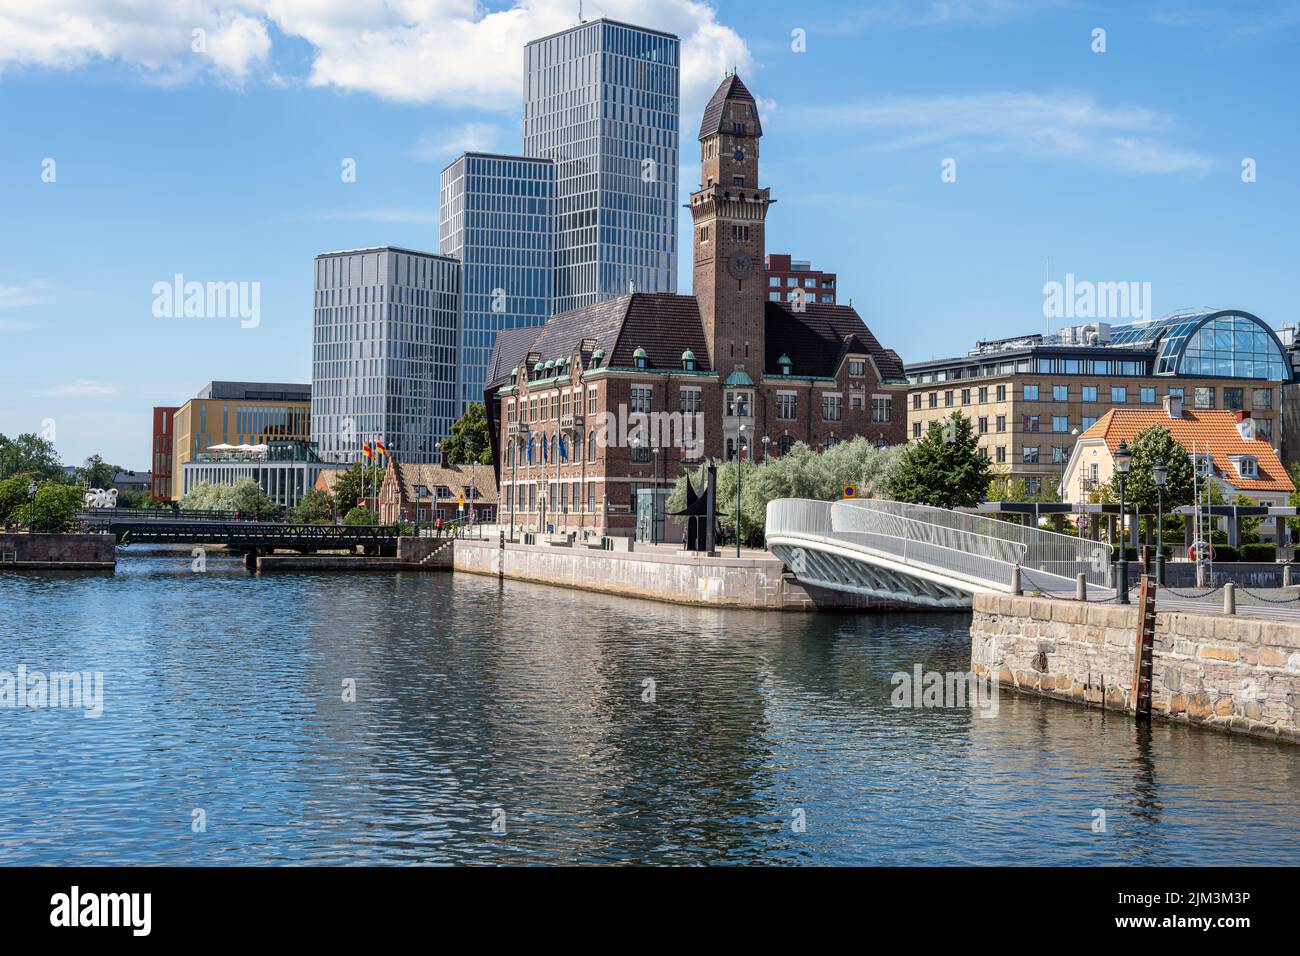 Old and modern buildings seen in Malmo, Sweden Stock Photo